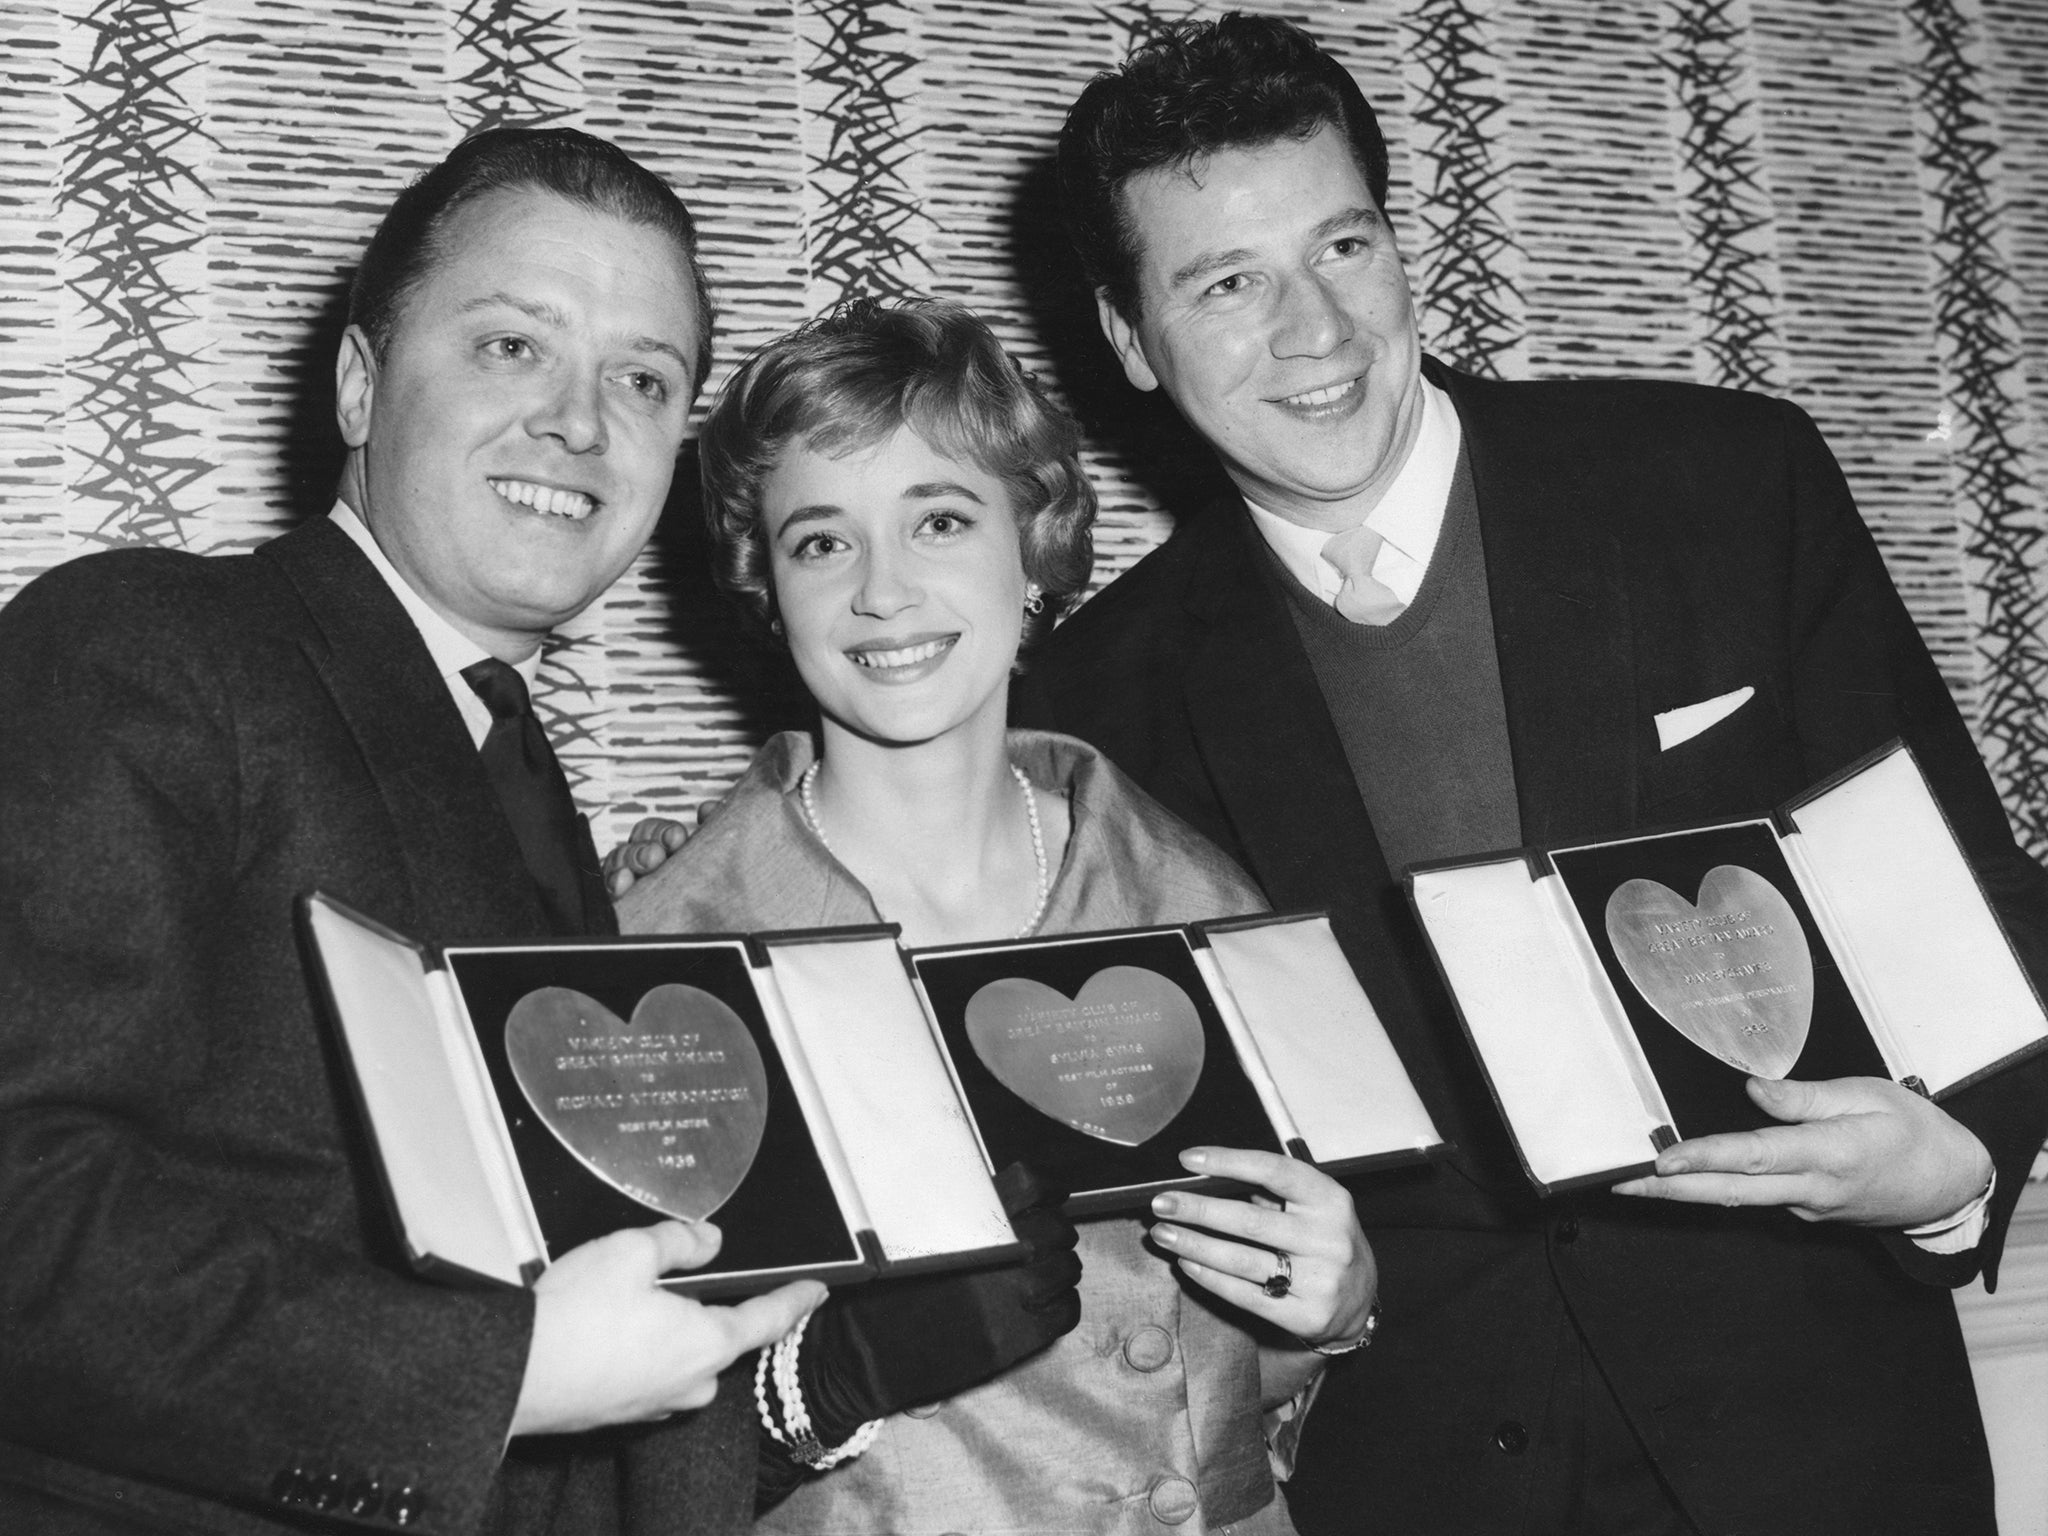 From left to right, actors Richard Attenborough, Sylvia Syms and Max Bygraves with their awards at the Variety Club Luncheon in March 1959